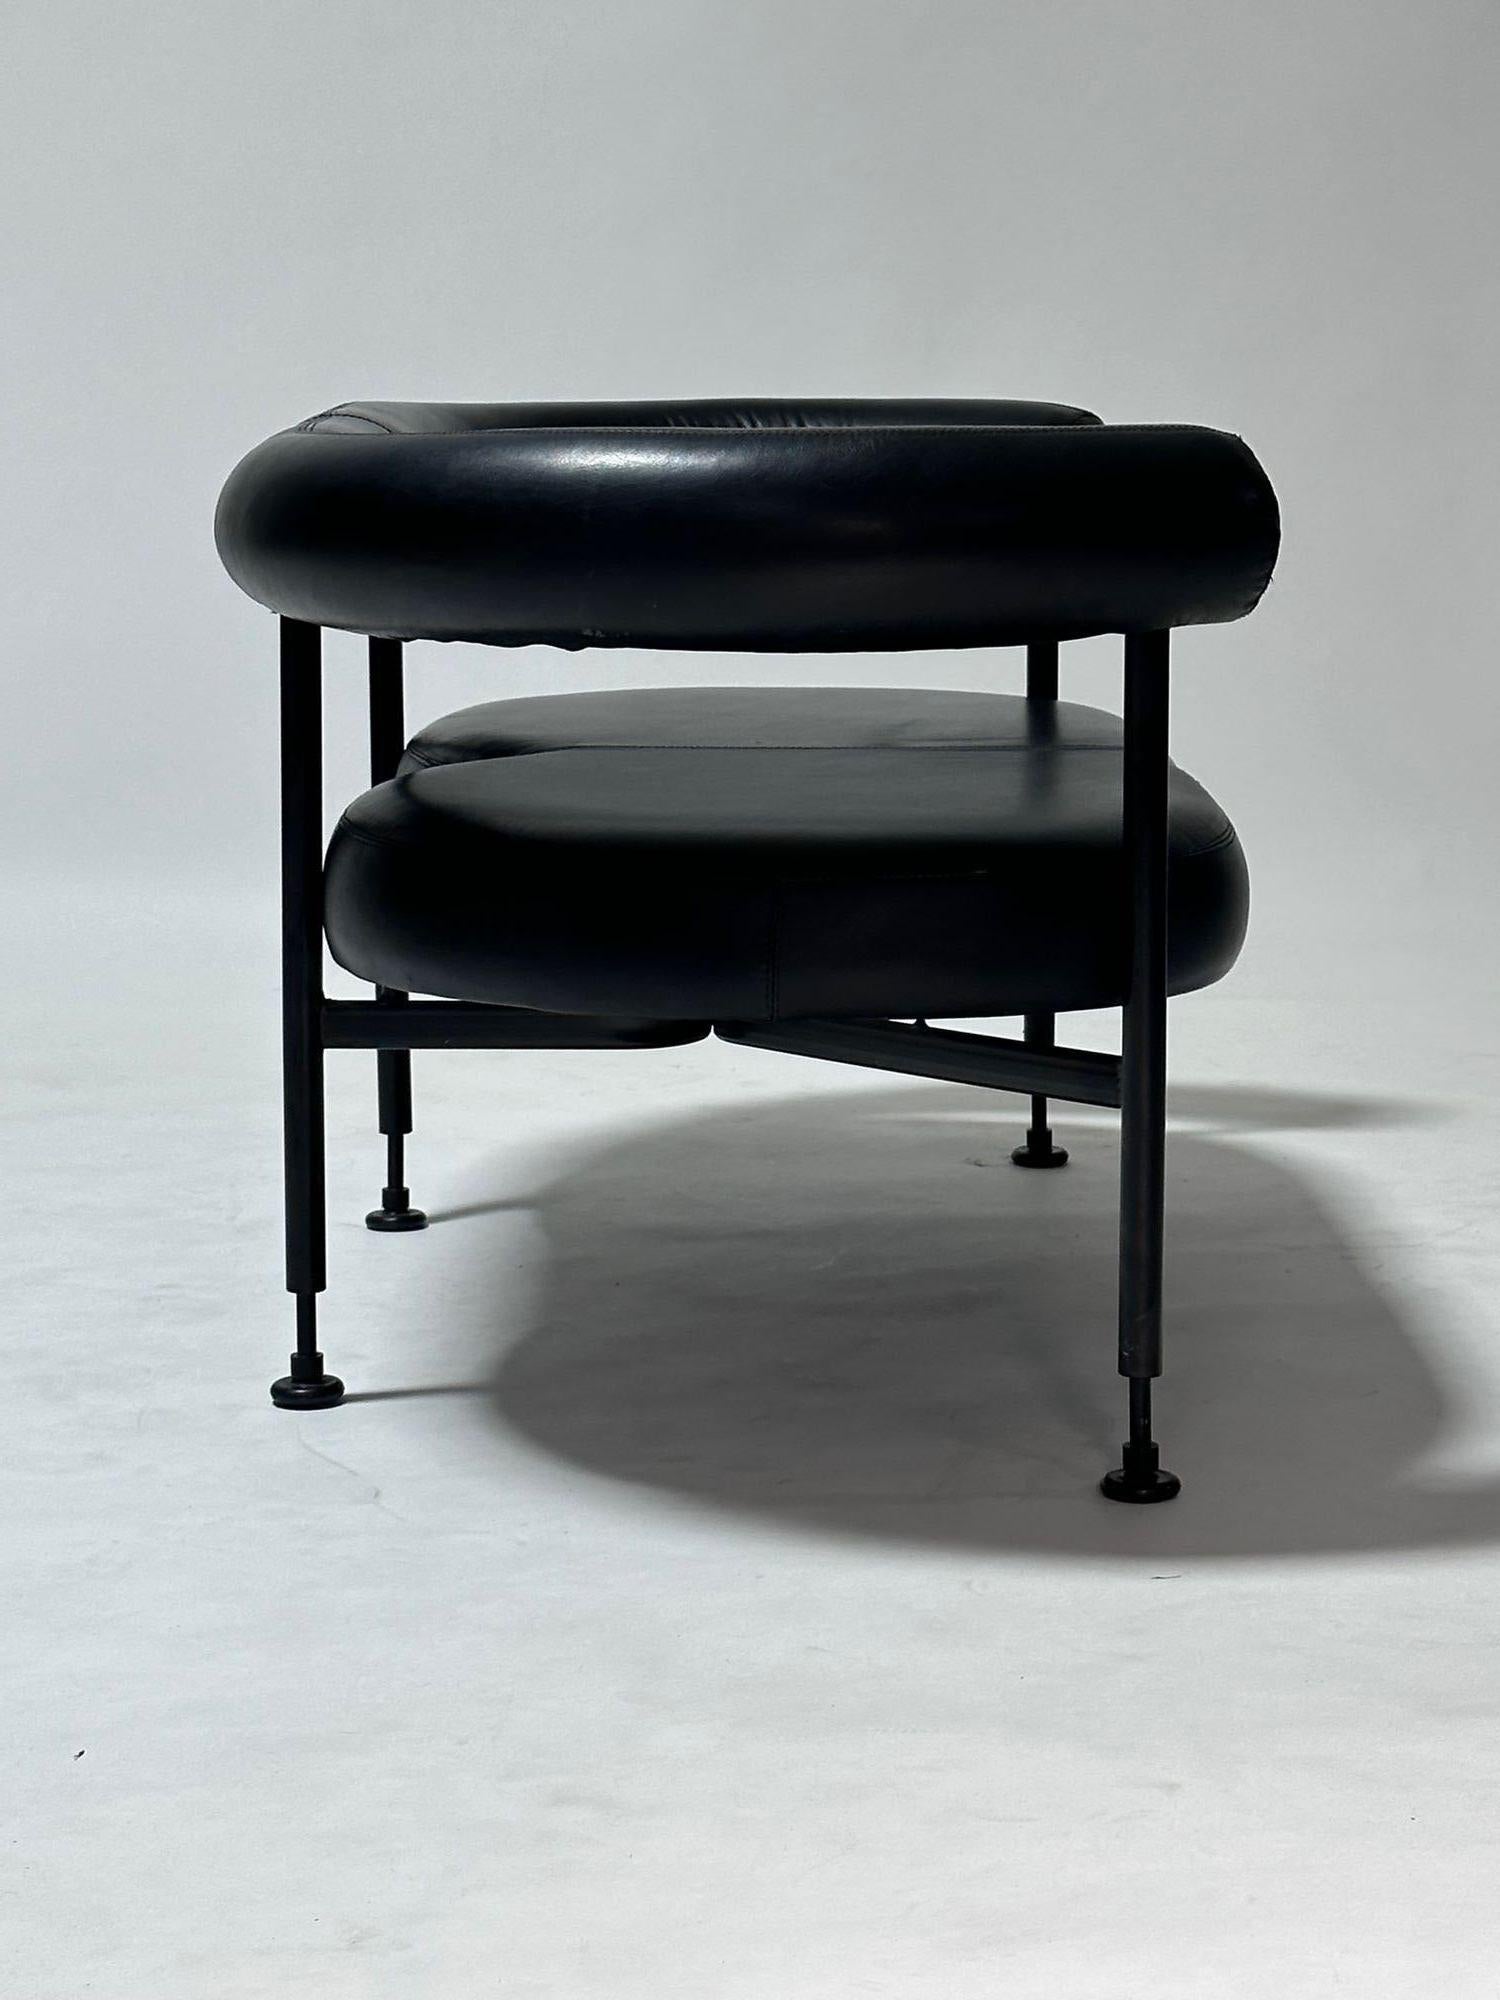 Postmodern Black Leather and Steel Settee Bench, 1980. Settee has wrap around arms with original leather.
